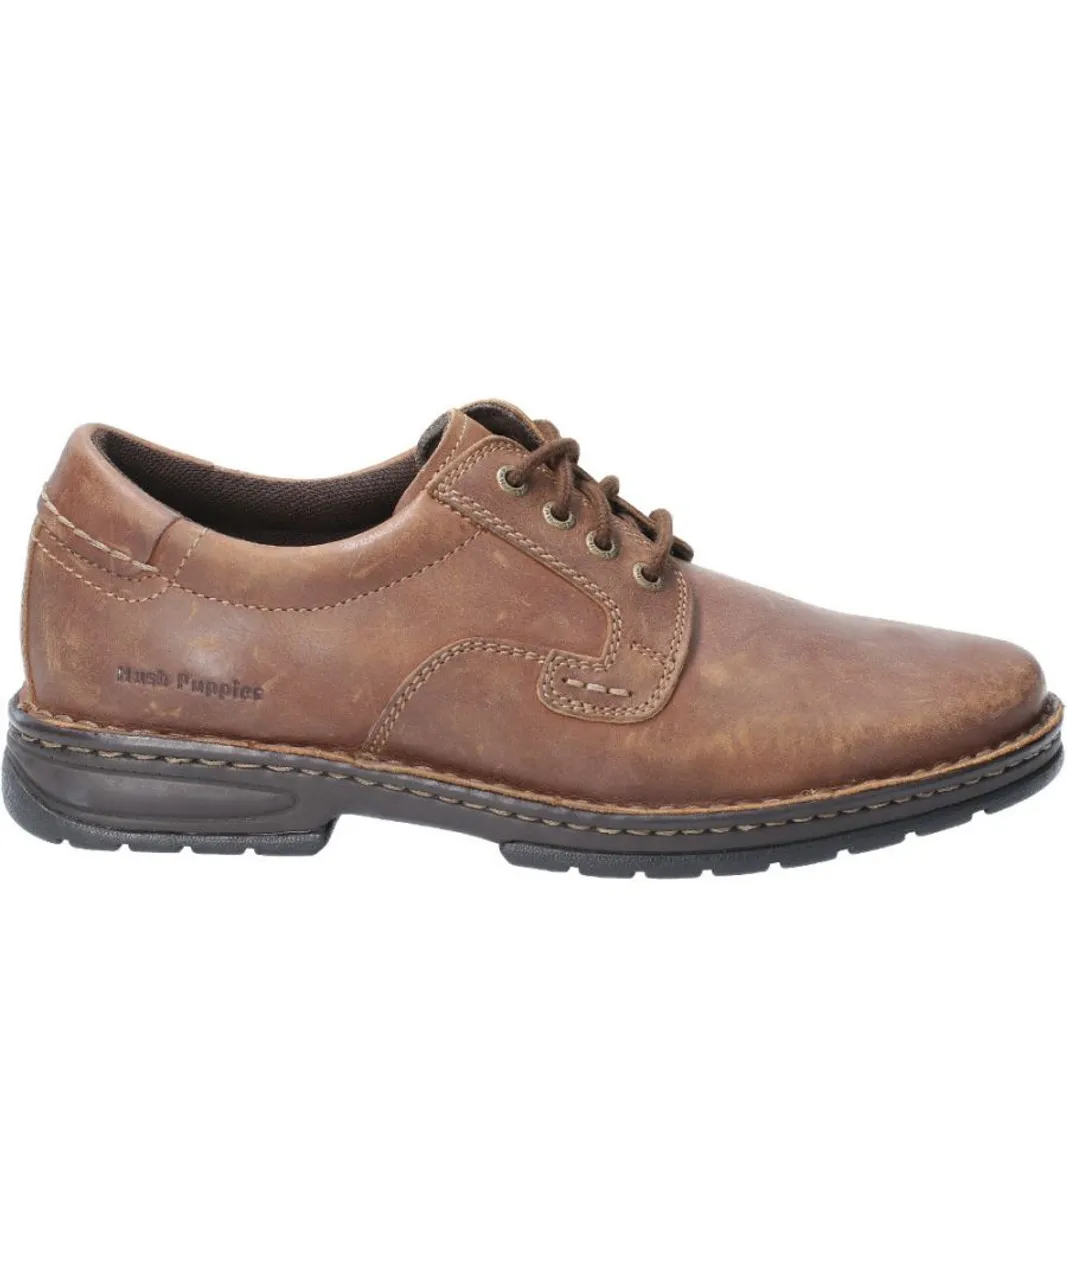 Hush Puppies Mens Outlaw II Laced Leather Shoe Oxford Shoes - Brown